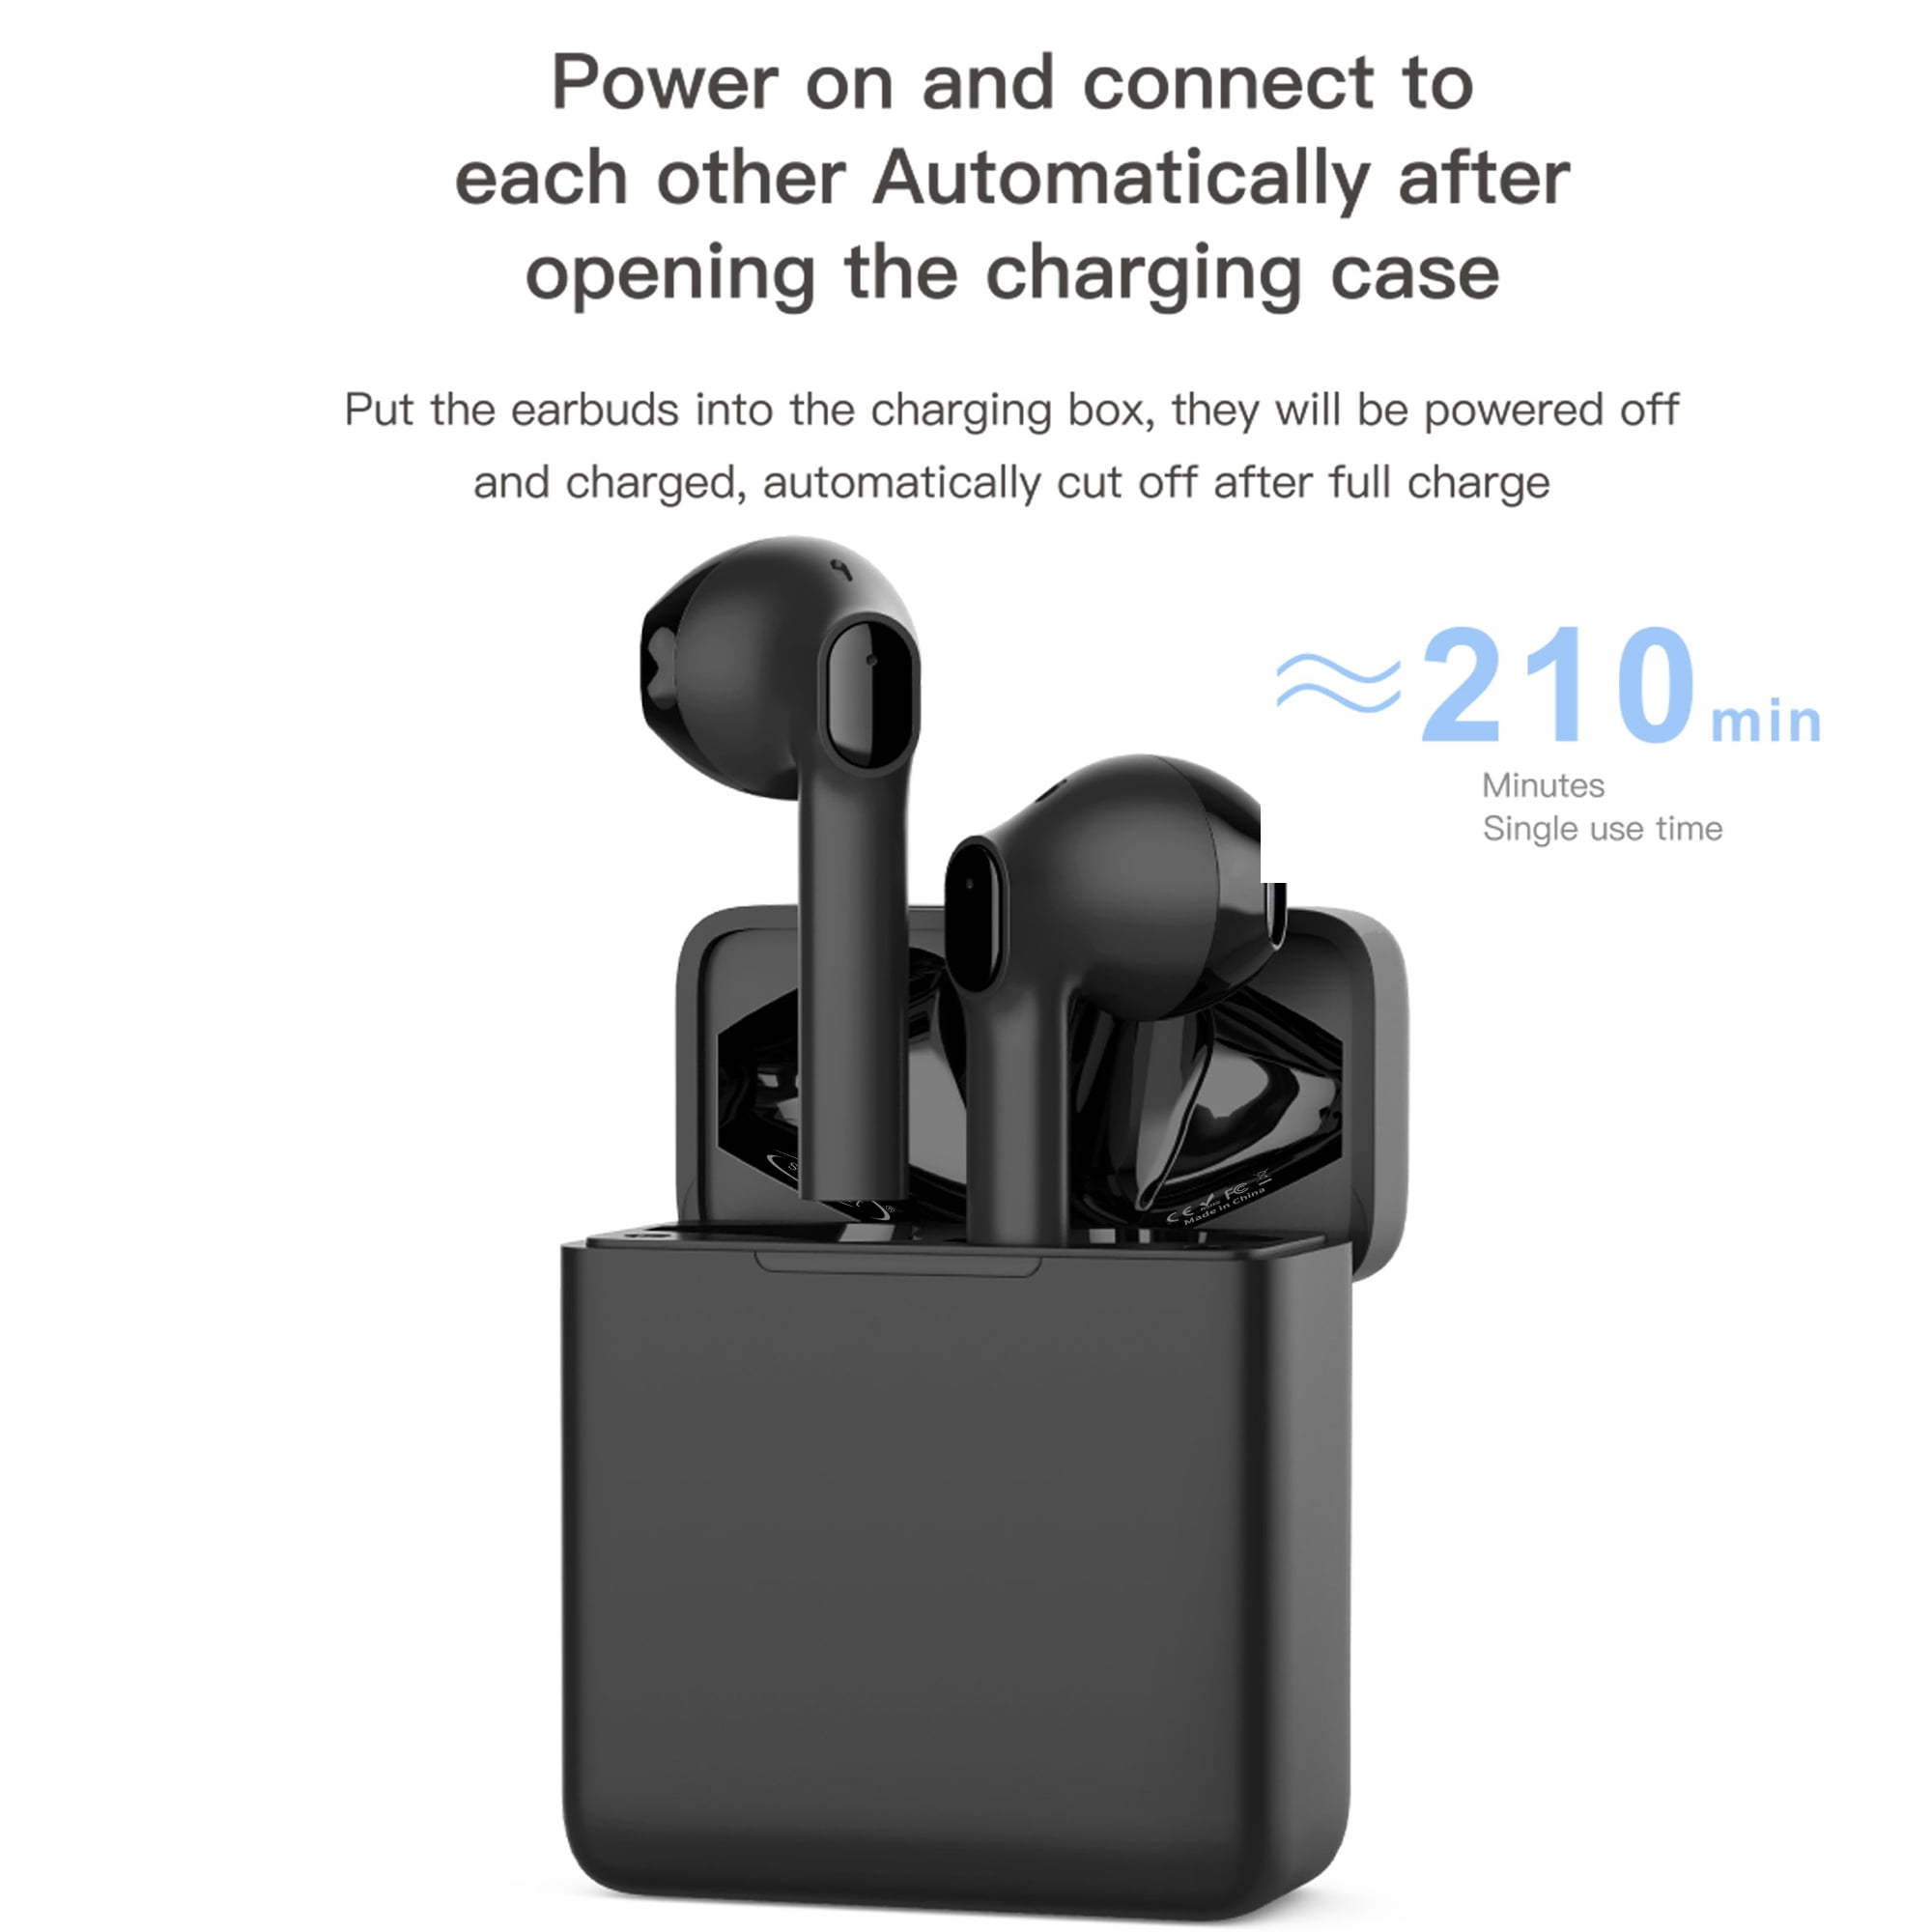 Bluetooth Earbuds Wireless Earphones, SEGMART 5.0 True Wireless Headphones  in Ear Buds for Apple iPhone Samsung Android, Stereo Sound 140H Playtime  Wireless Earbuds with Mic Touch Control, L2978 